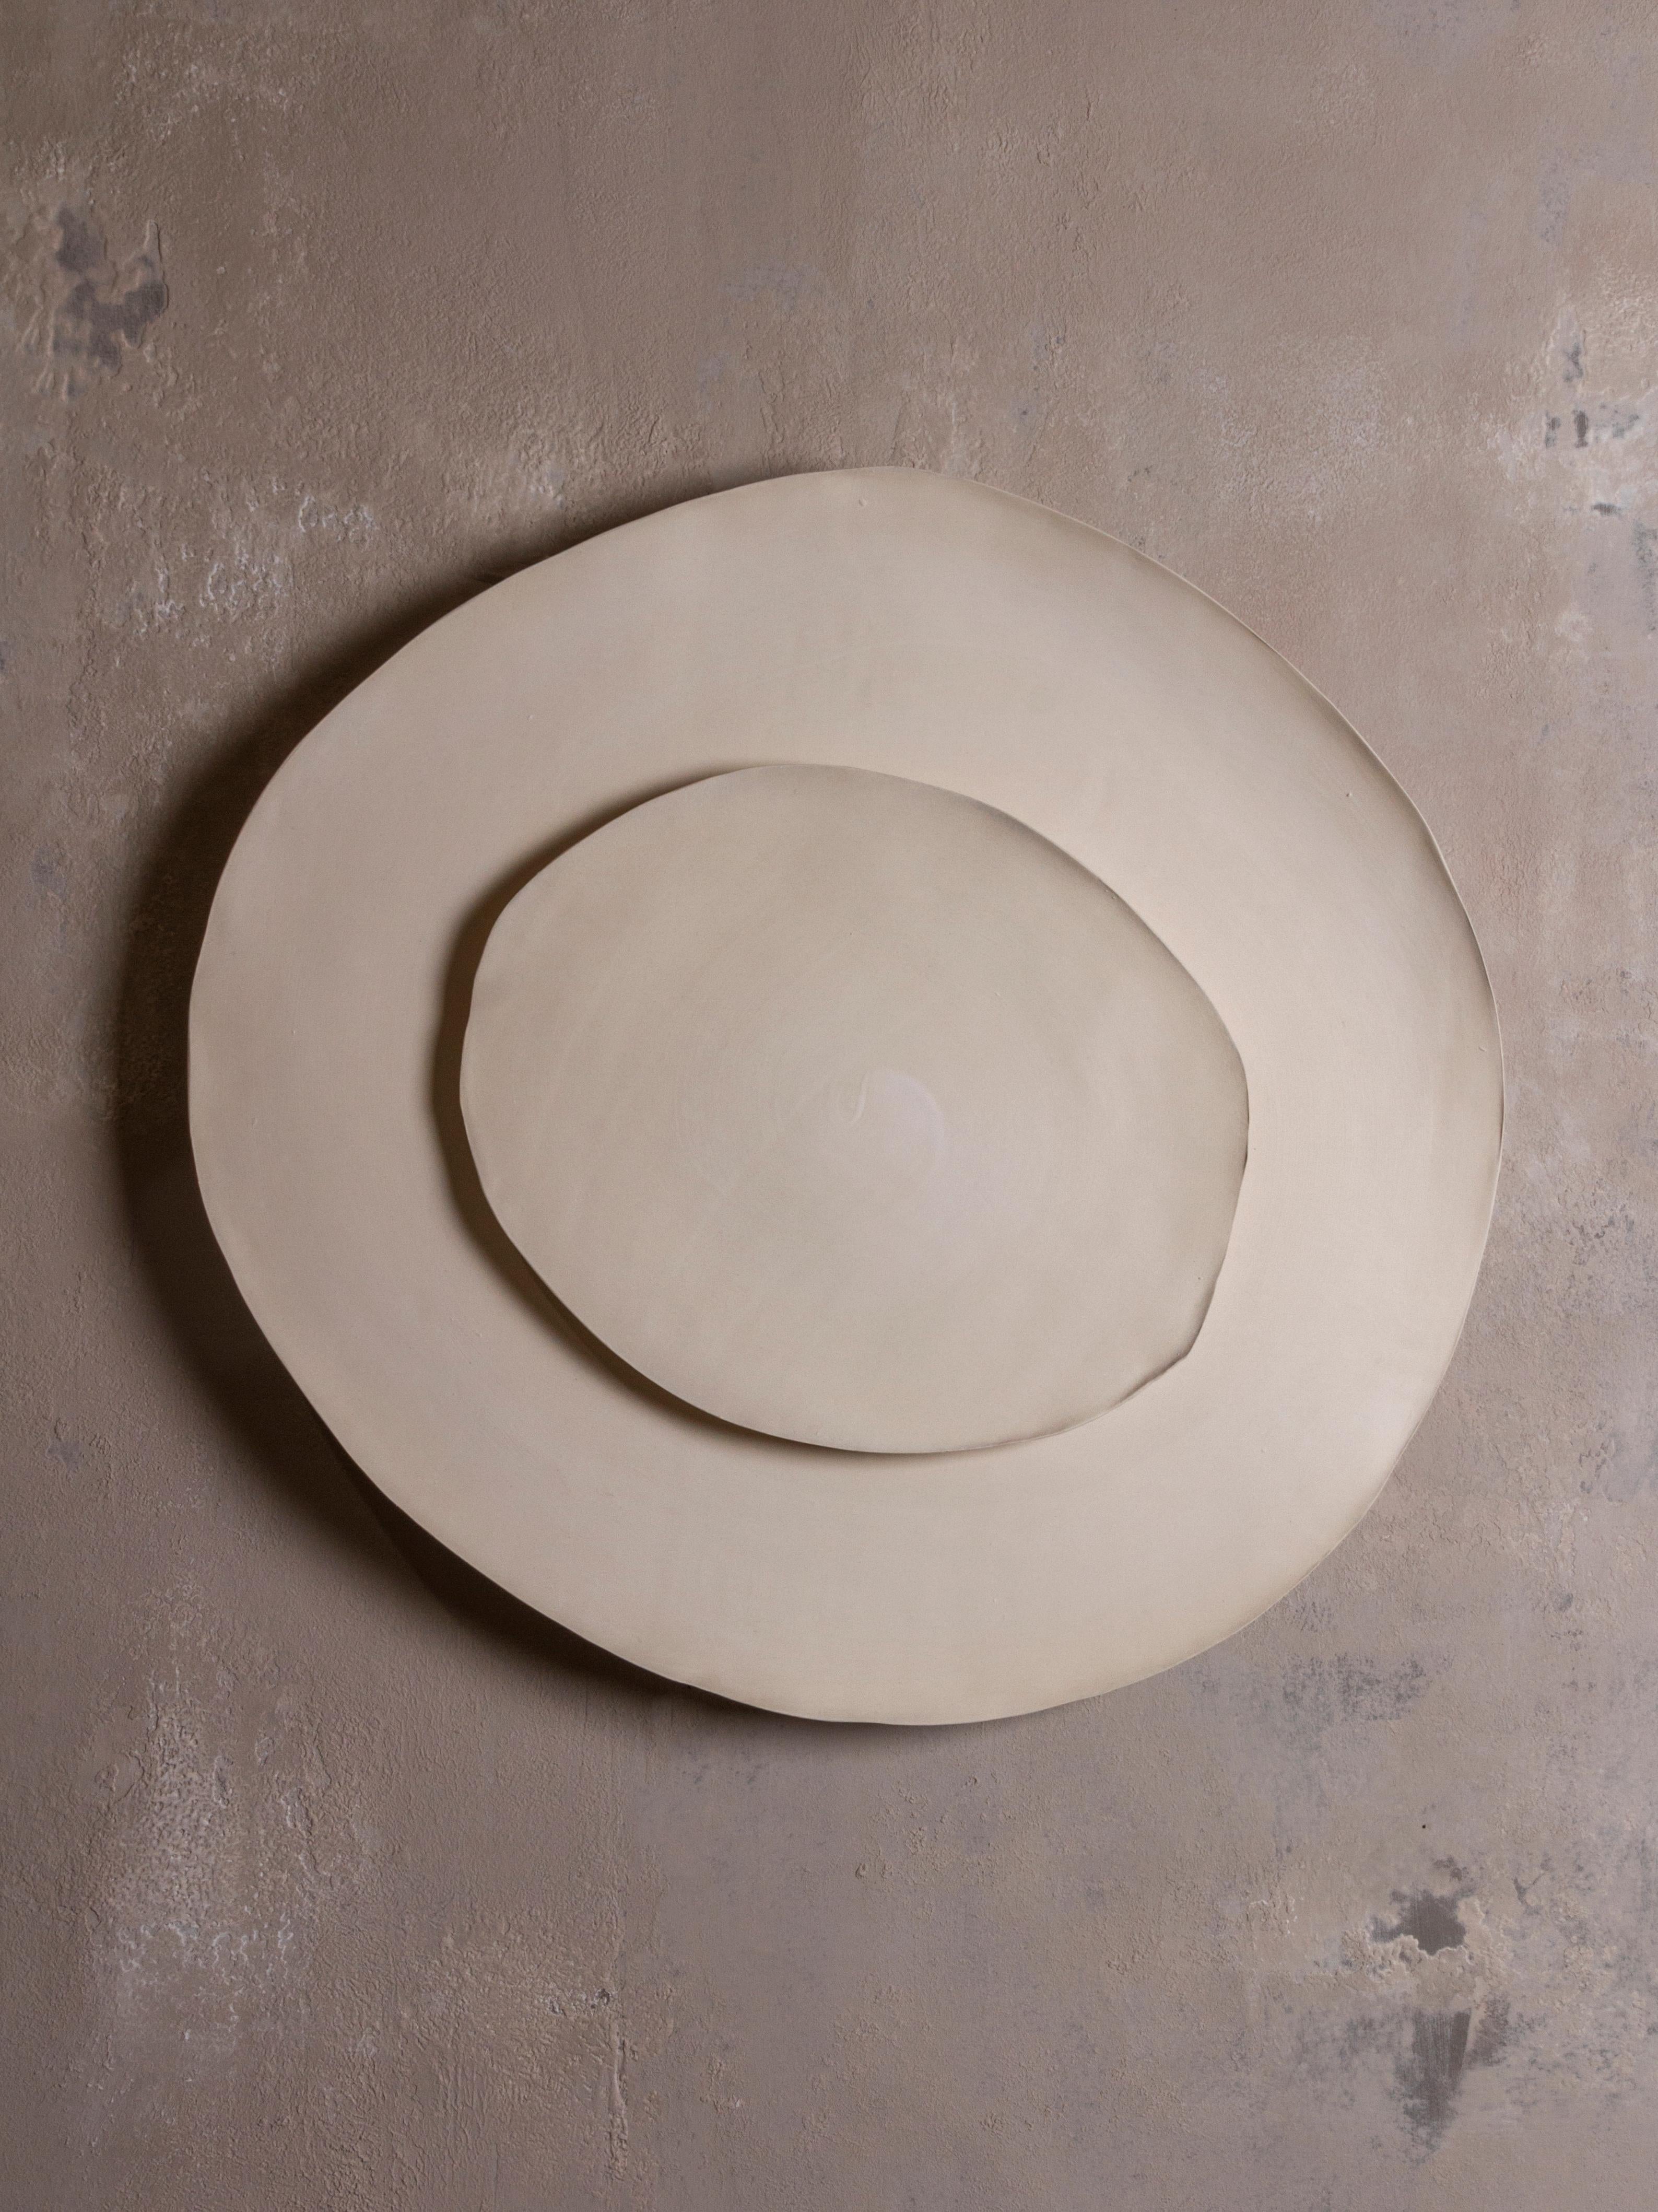 Silk #20 wall light by Margaux Leycuras
One of a Kind, Signed and numbered
Dimensions: Ø54 x H 57 cm
Material: Ceramic, sandy stoneware platters with a porcelain slip finish.
The piece is signed, numbered and delivered with a certificate of